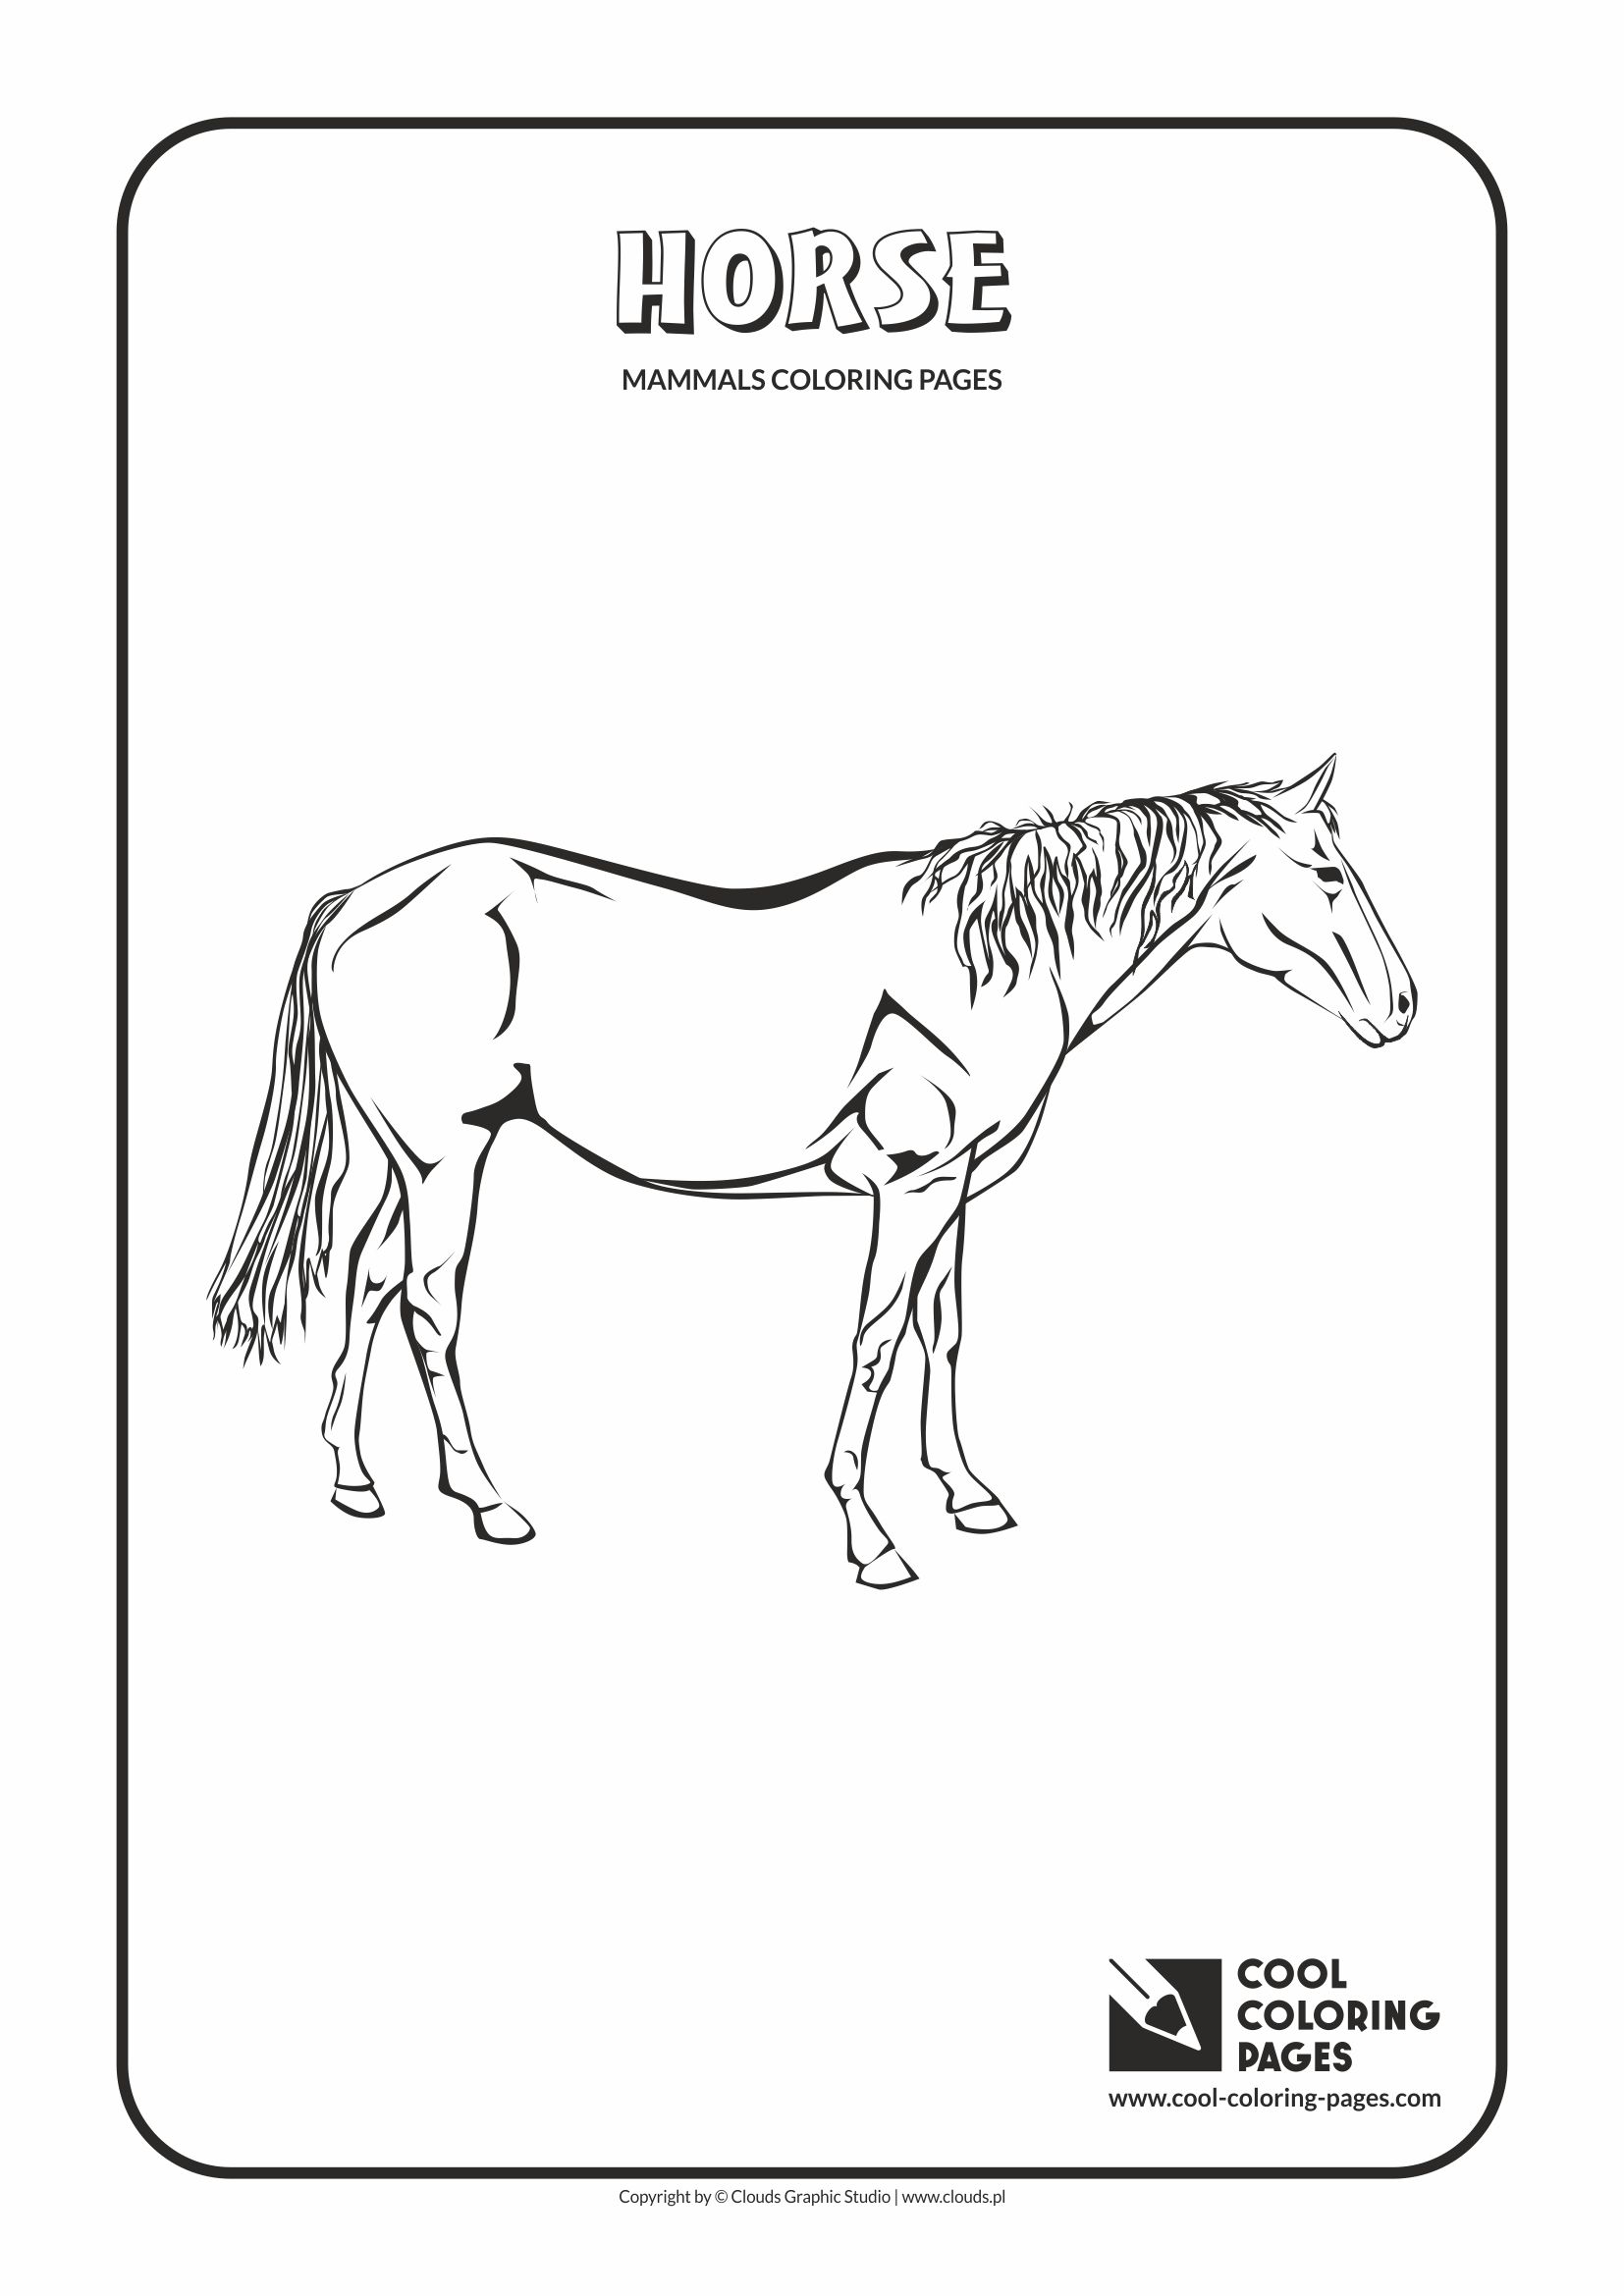 Download Cool Coloring Pages Mammals coloring pages - Cool Coloring Pages | Free educational coloring ...